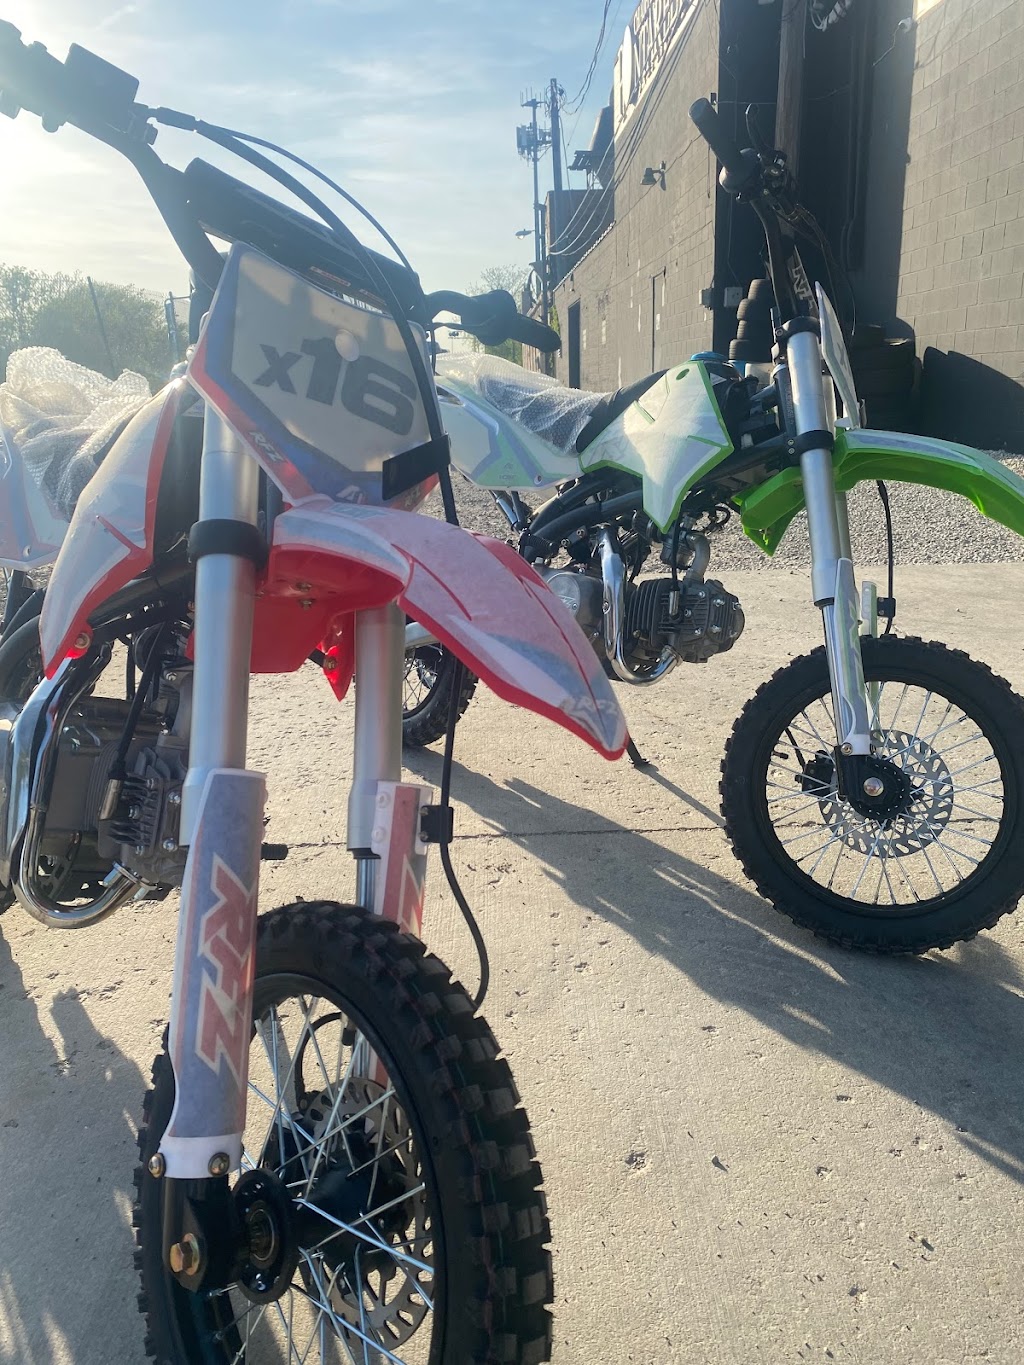 EPM Motorsports: Motorcycle, ATV & Small Engine Repair - Chicago | 5586 N Northwest Hwy, Chicago, IL 60630 | Phone: (773) 207-3730